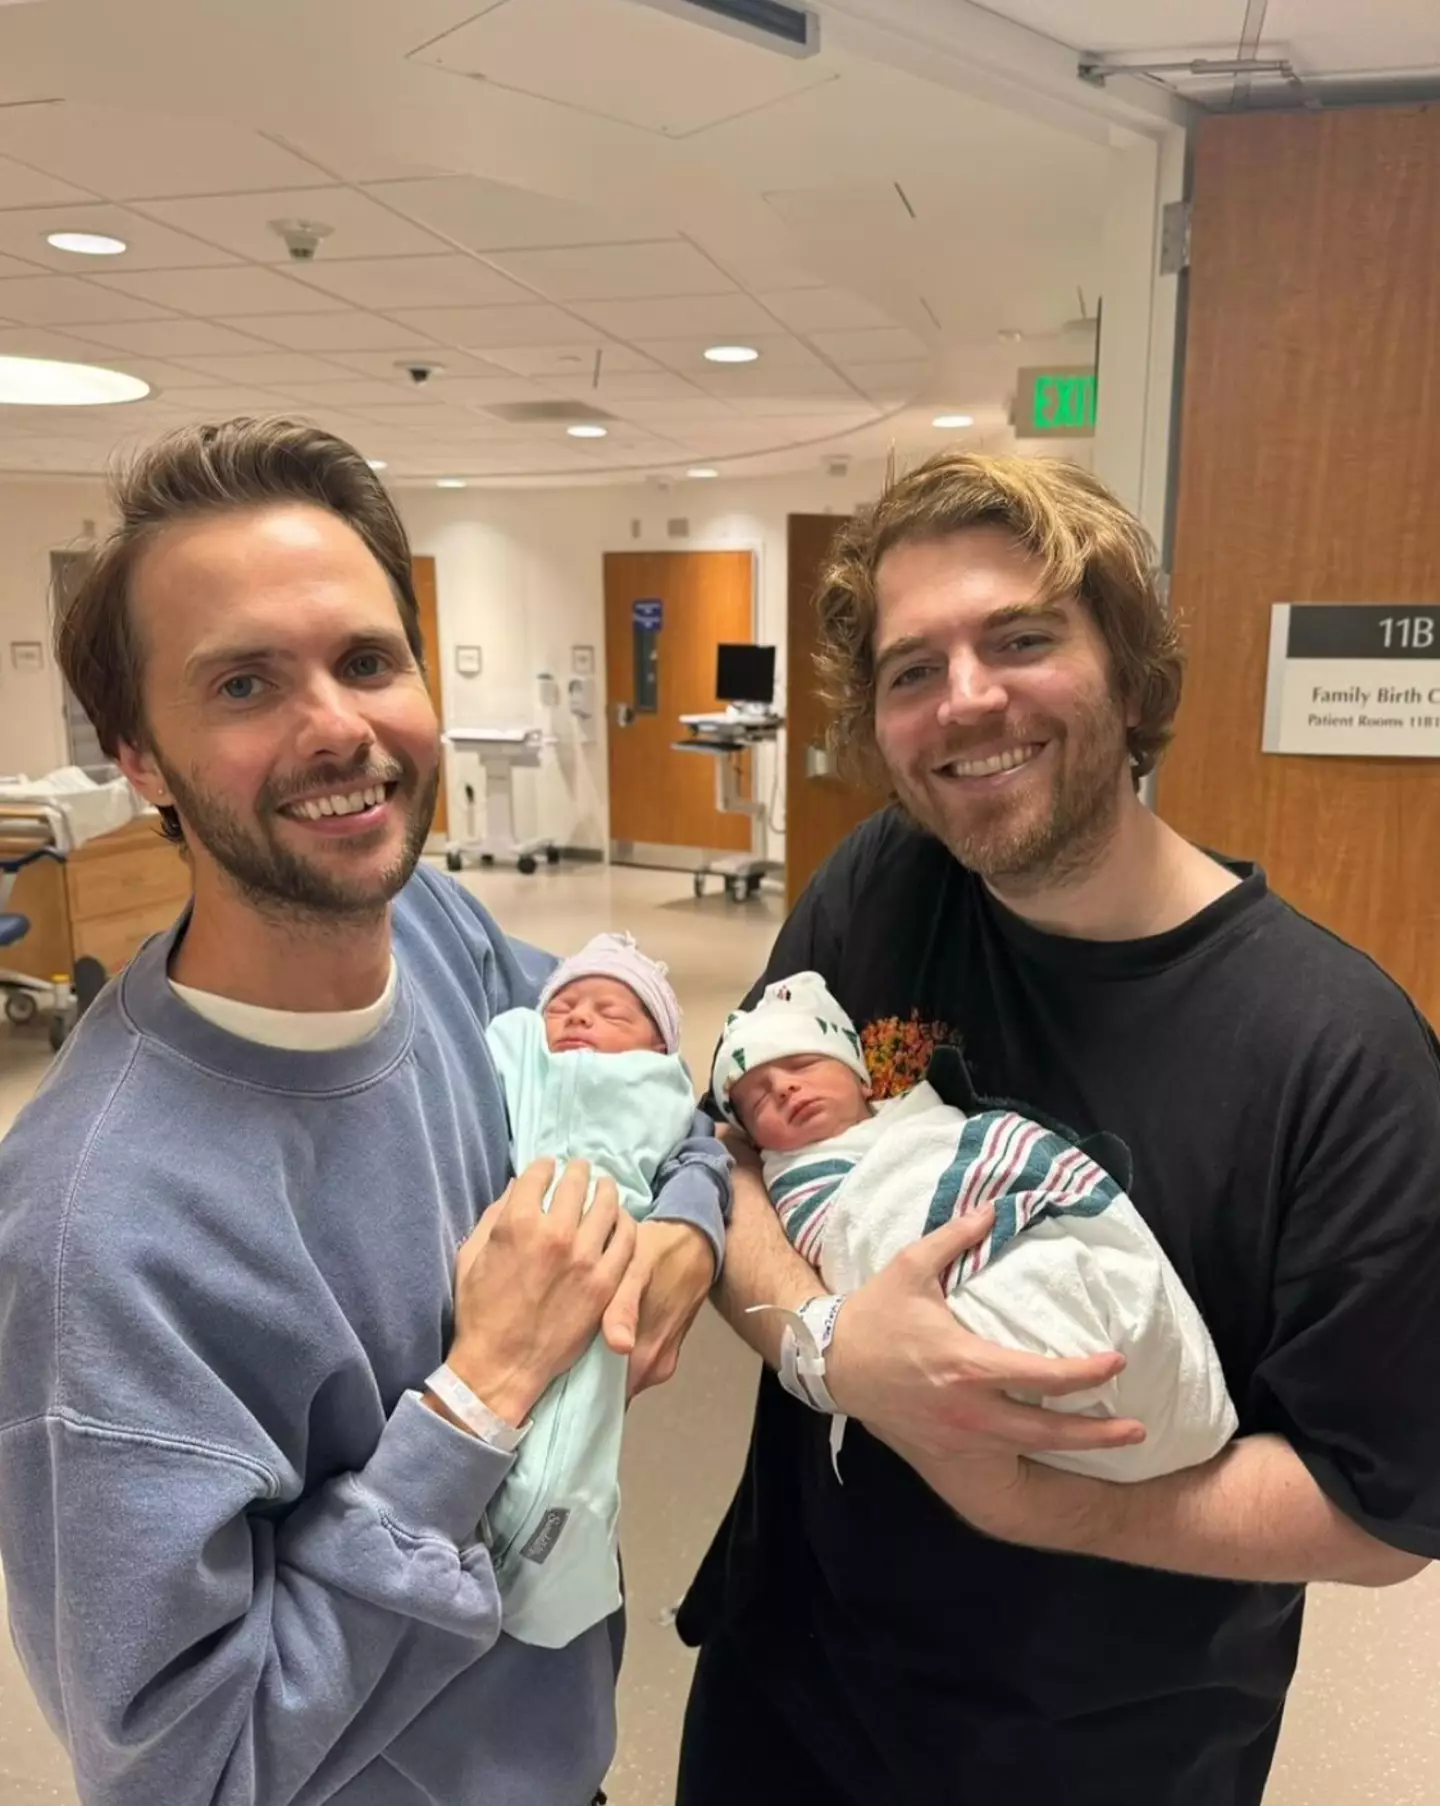 The duo welcomed twin boys.